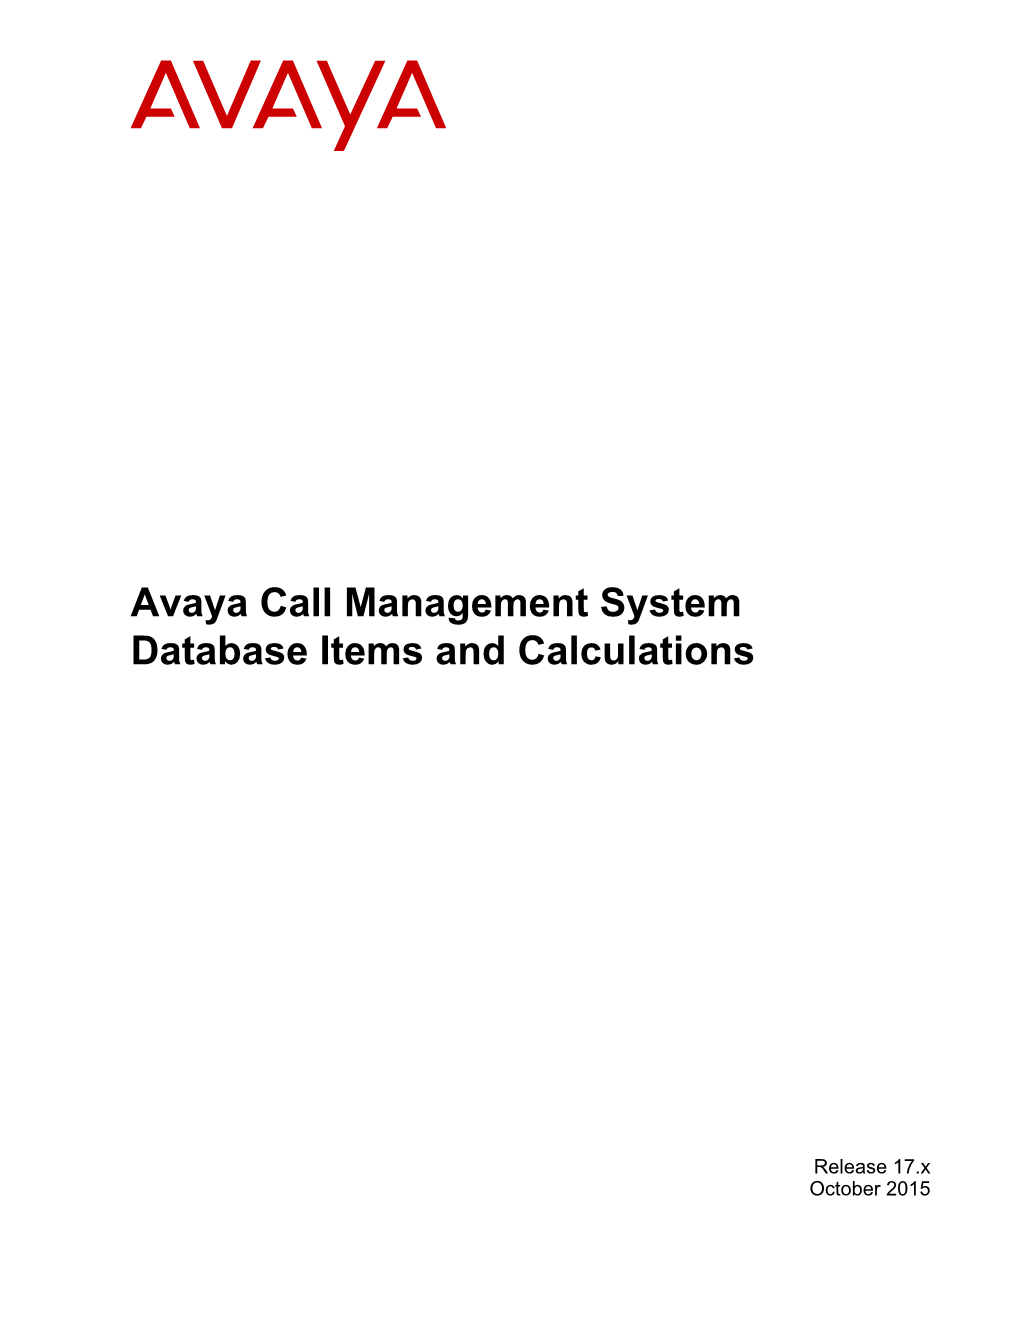 Avaya Call Management System Database Items and Calculations